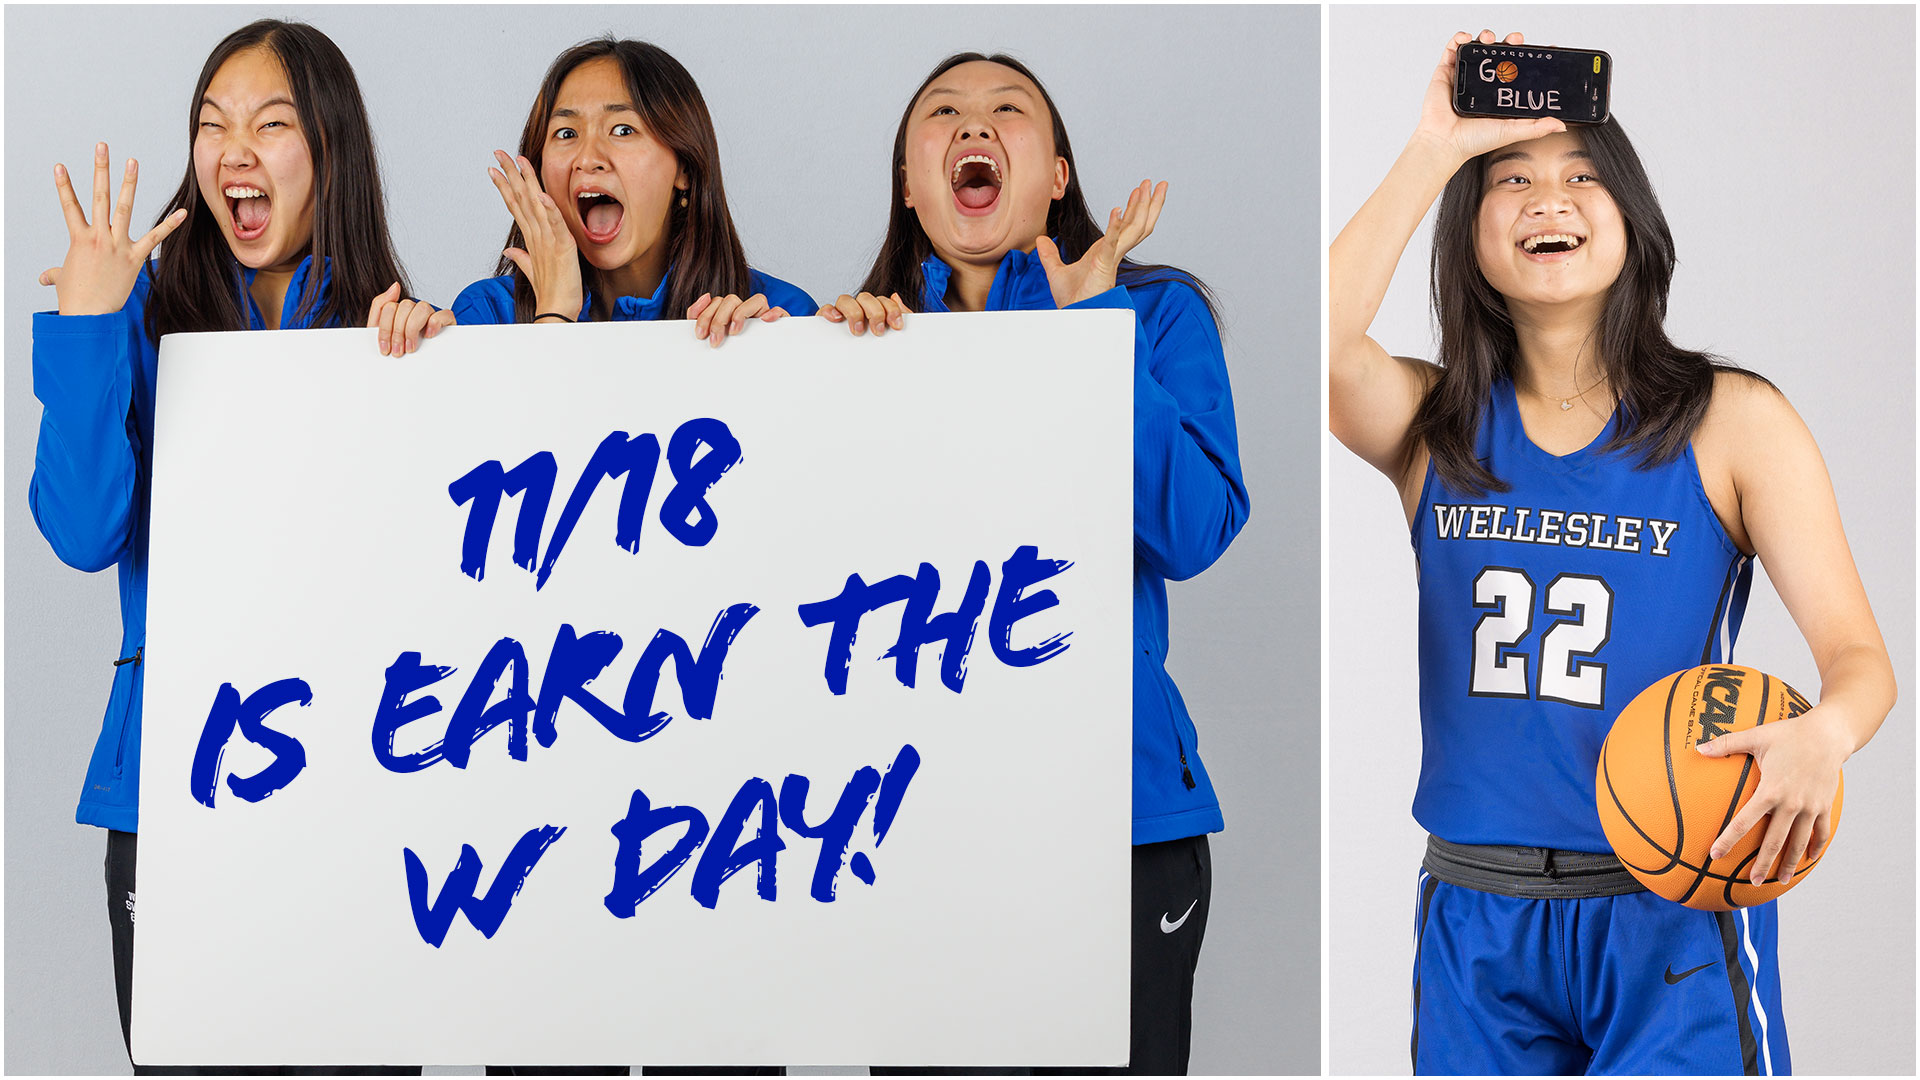 Earn The W Day is November 18!